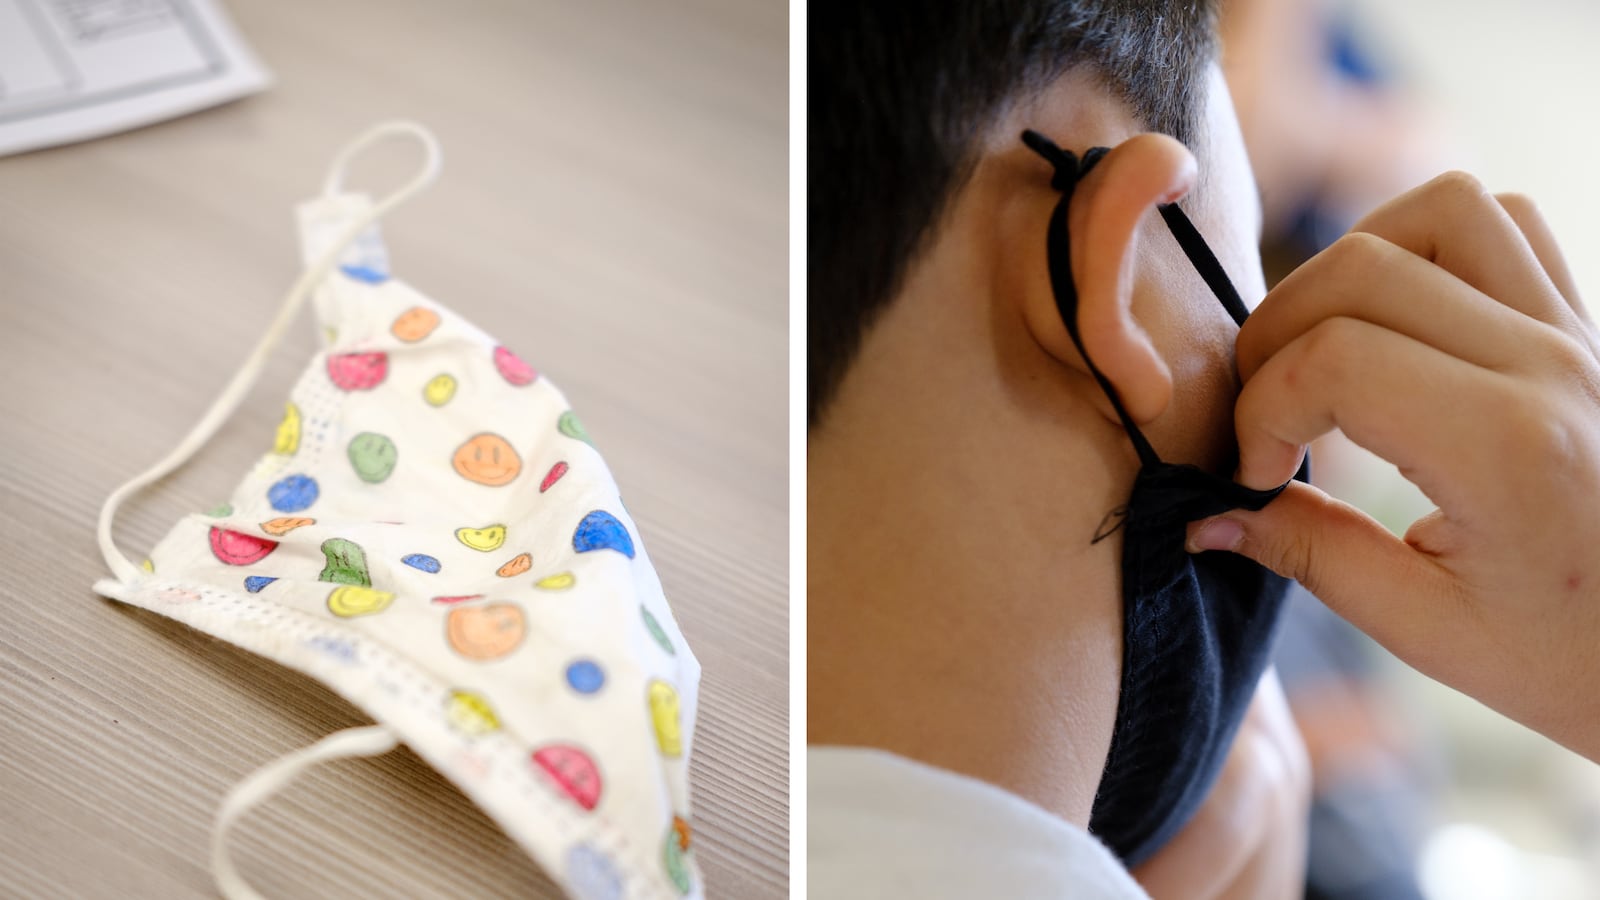 (Left) A student’s mask lays on a desk, adorned with colorful smiley faces. (Right) A student adjusts their mask while listening in the classroom.